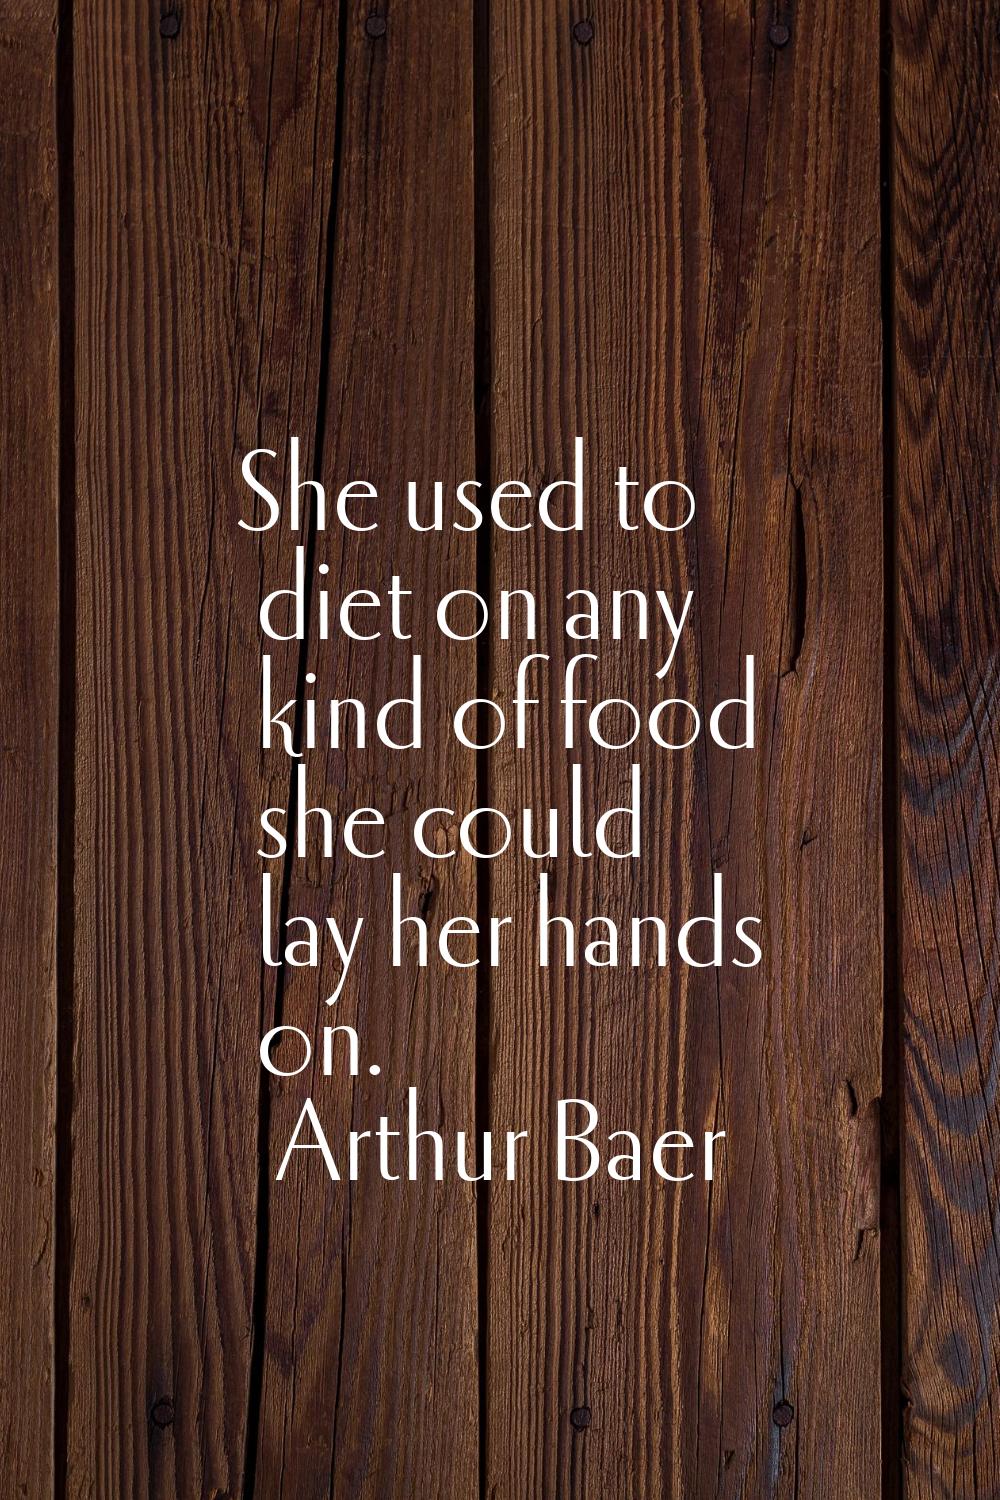 She used to diet on any kind of food she could lay her hands on.